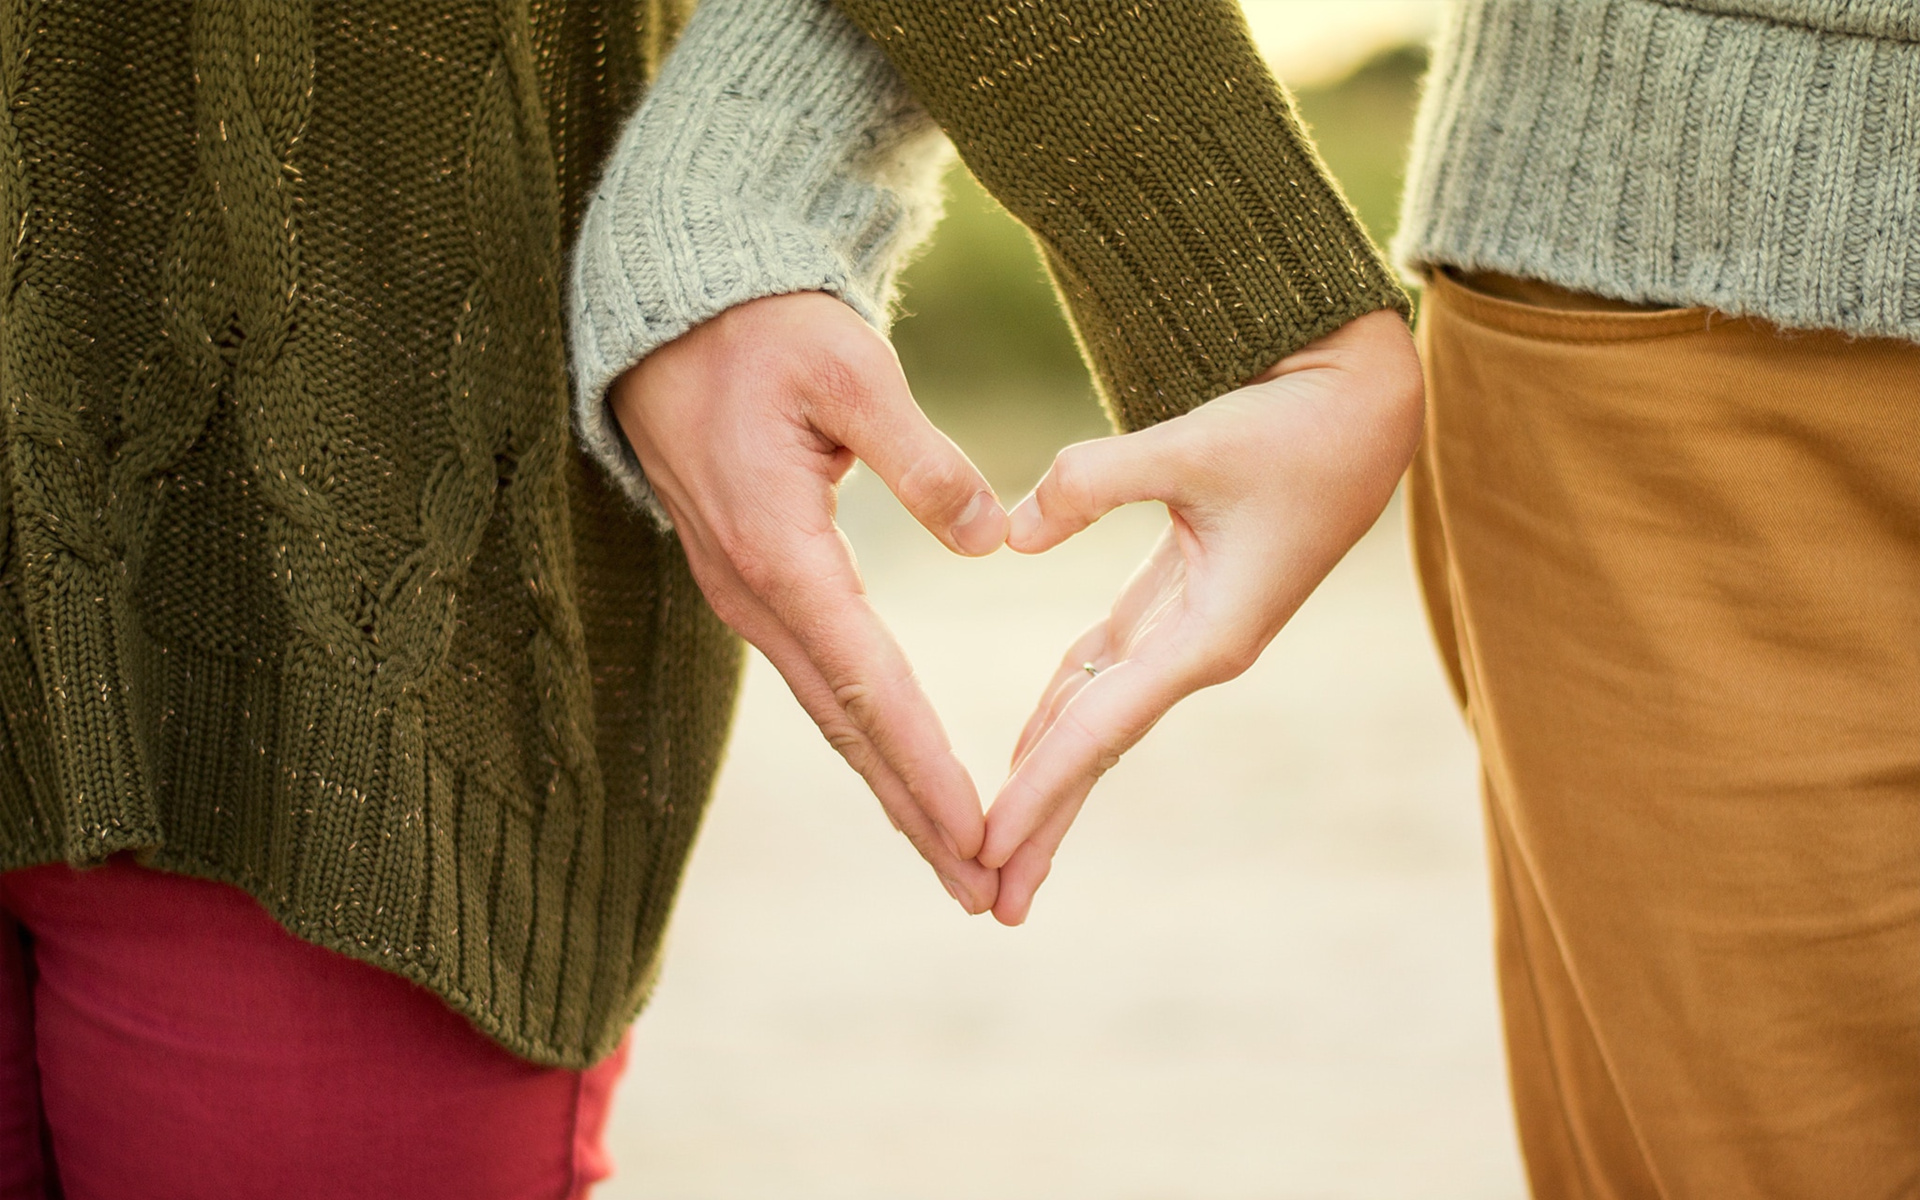 A Couple Making A Heart Shape While Holding Hands